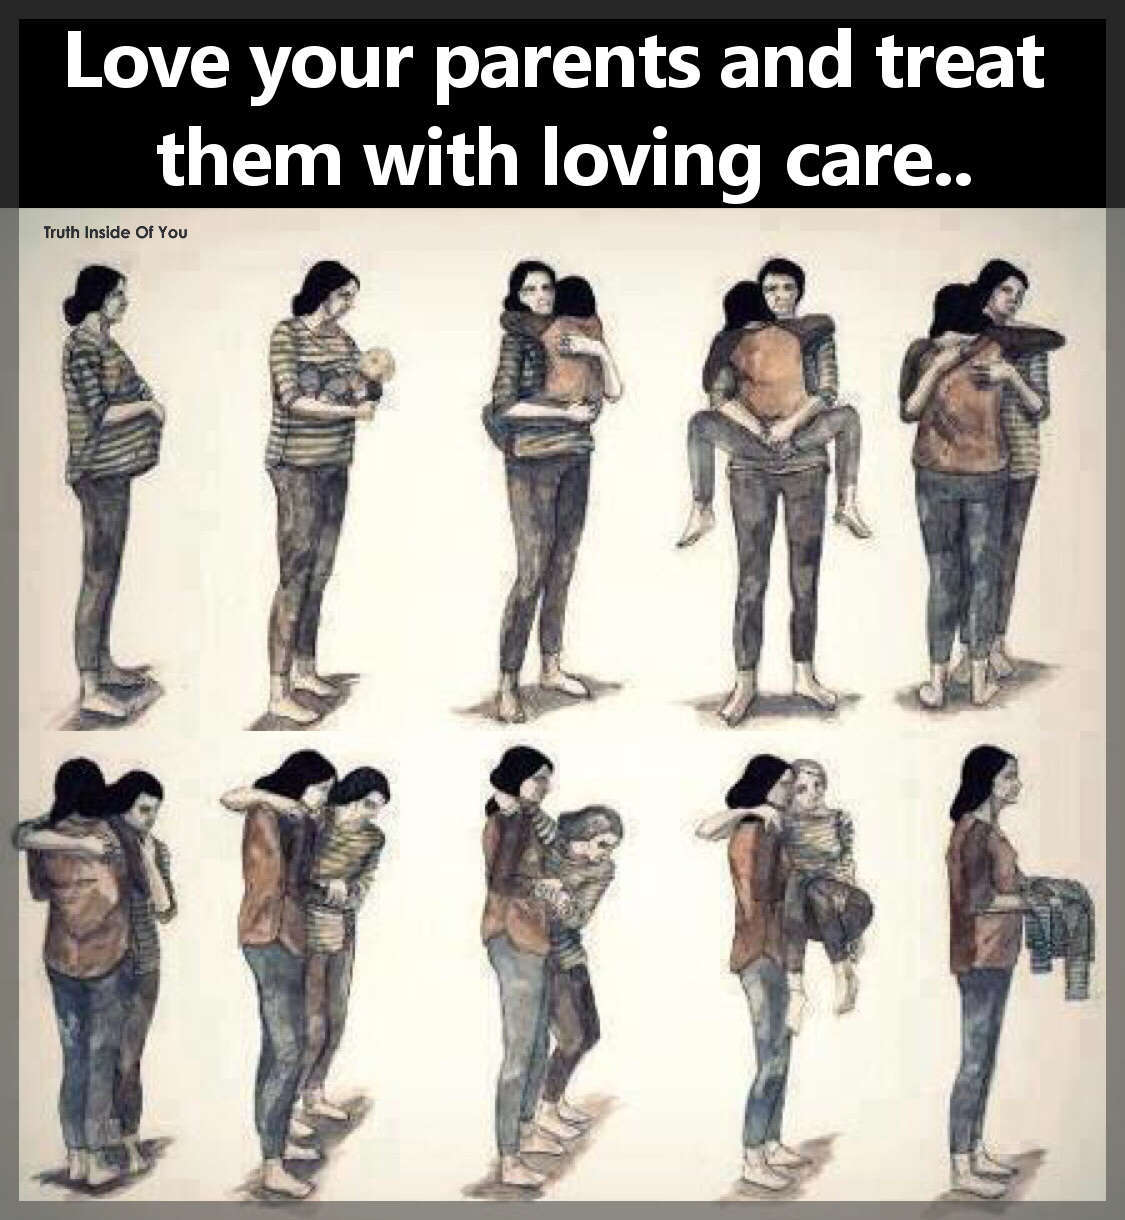 Love your parents and treat them with loving care.